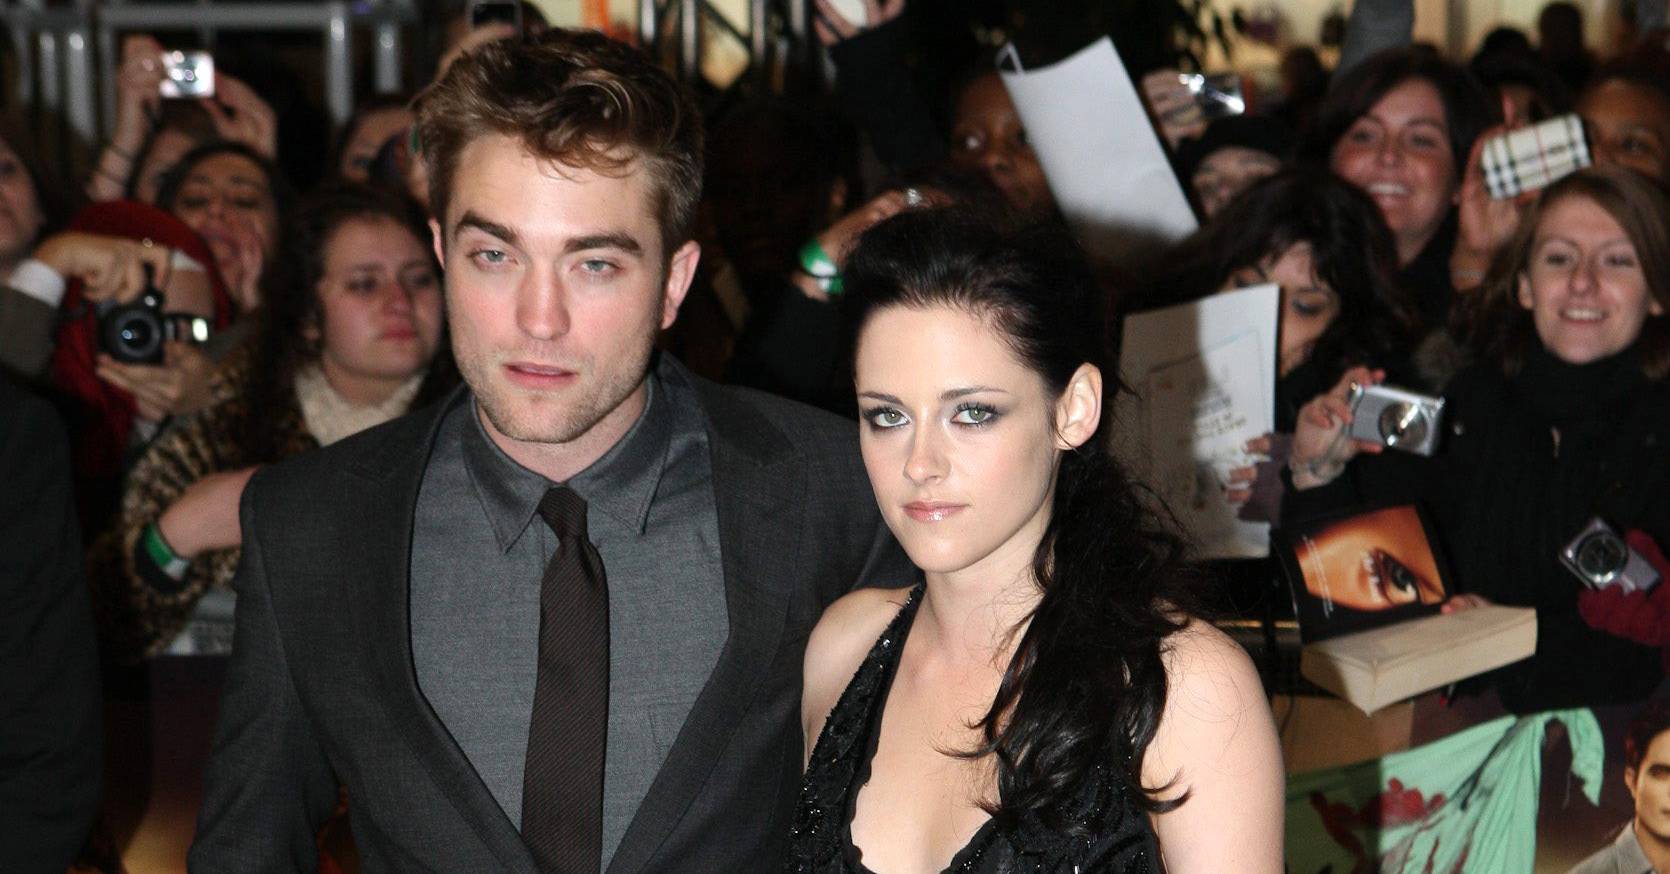 Kristen Stewart and Robert Pattinson are Back on Trial Basis | The Blemish1670 x 874